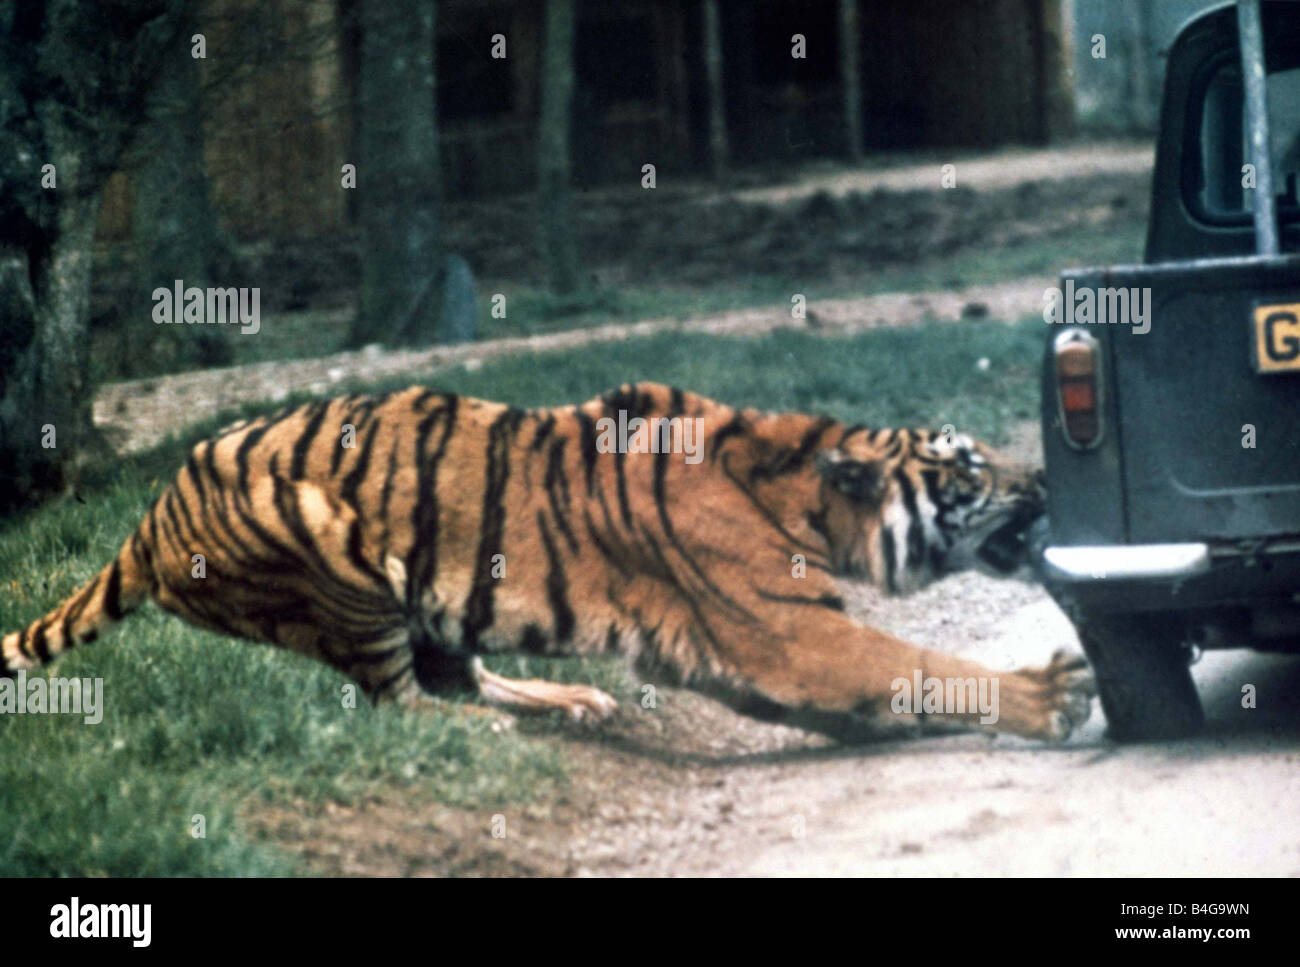 Tiger ripping a truck tyre off at Longleat Safari Park Wiltshire Help There s a tiger in my tyre June 1977 Mirrorpix Stock Photo